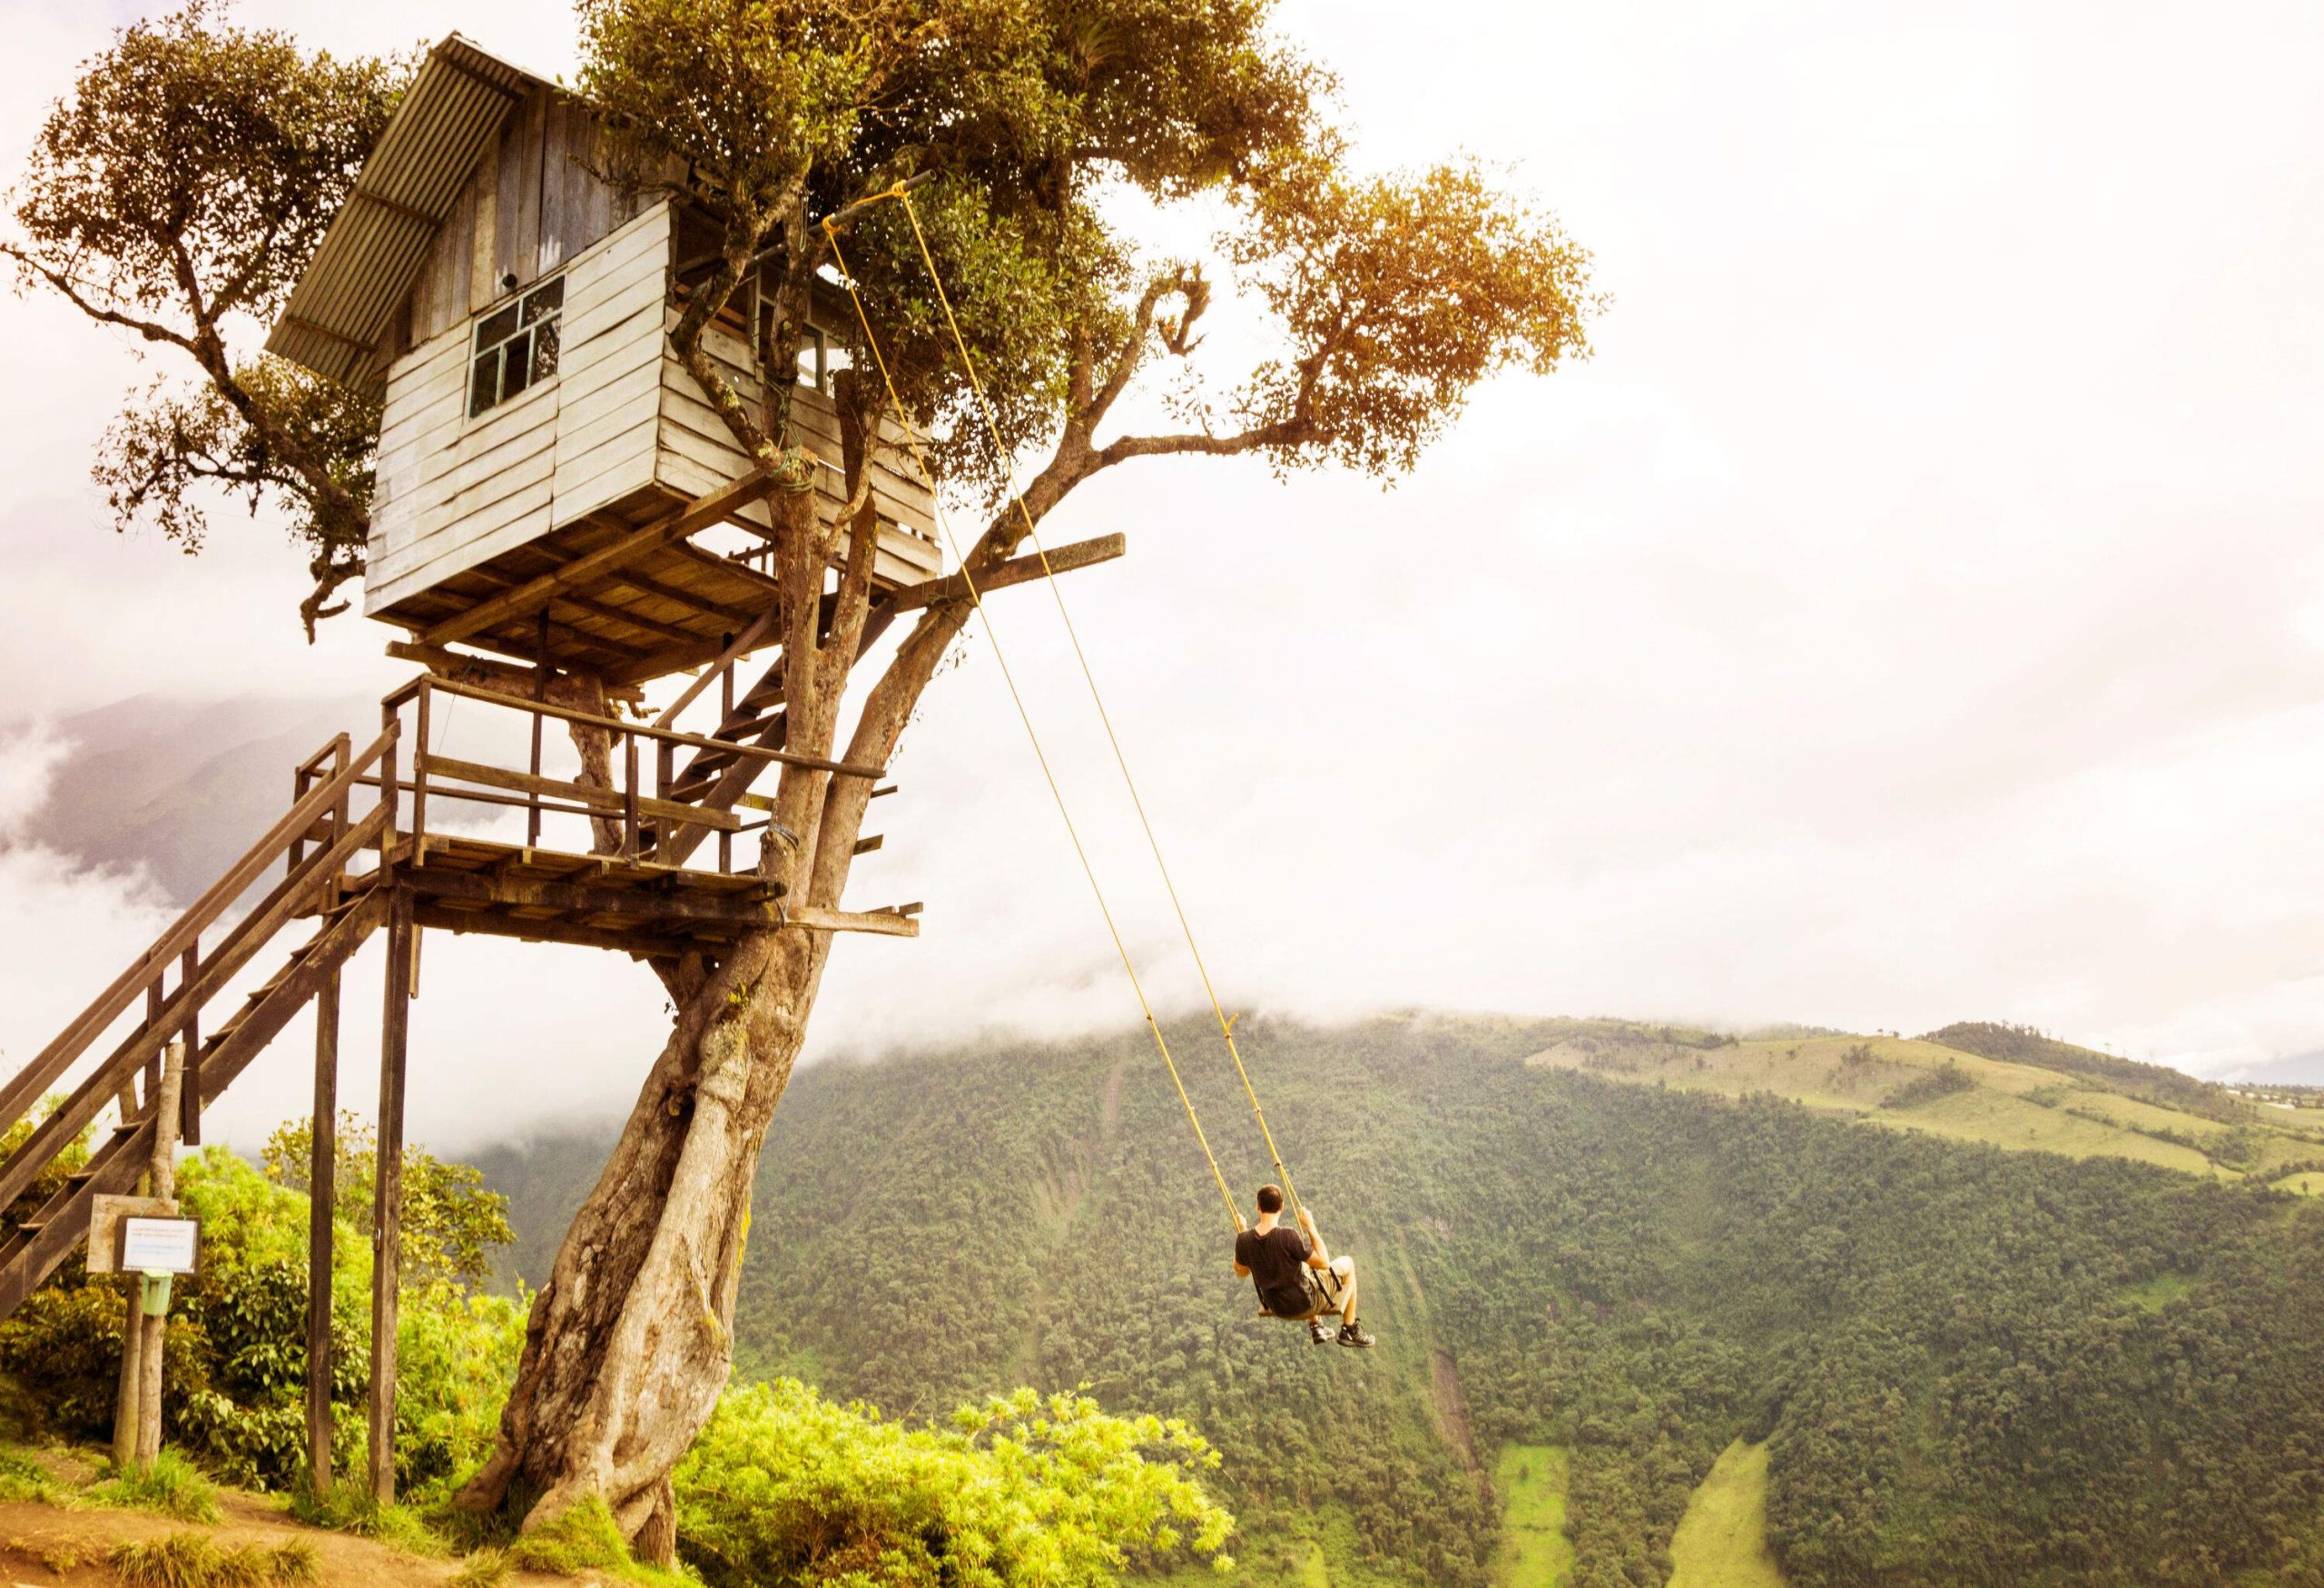 A person on a swing tied to a treehouse perched on a summit, offering a breathtaking view of the majestic forested mountain range under a cloudy sky. 